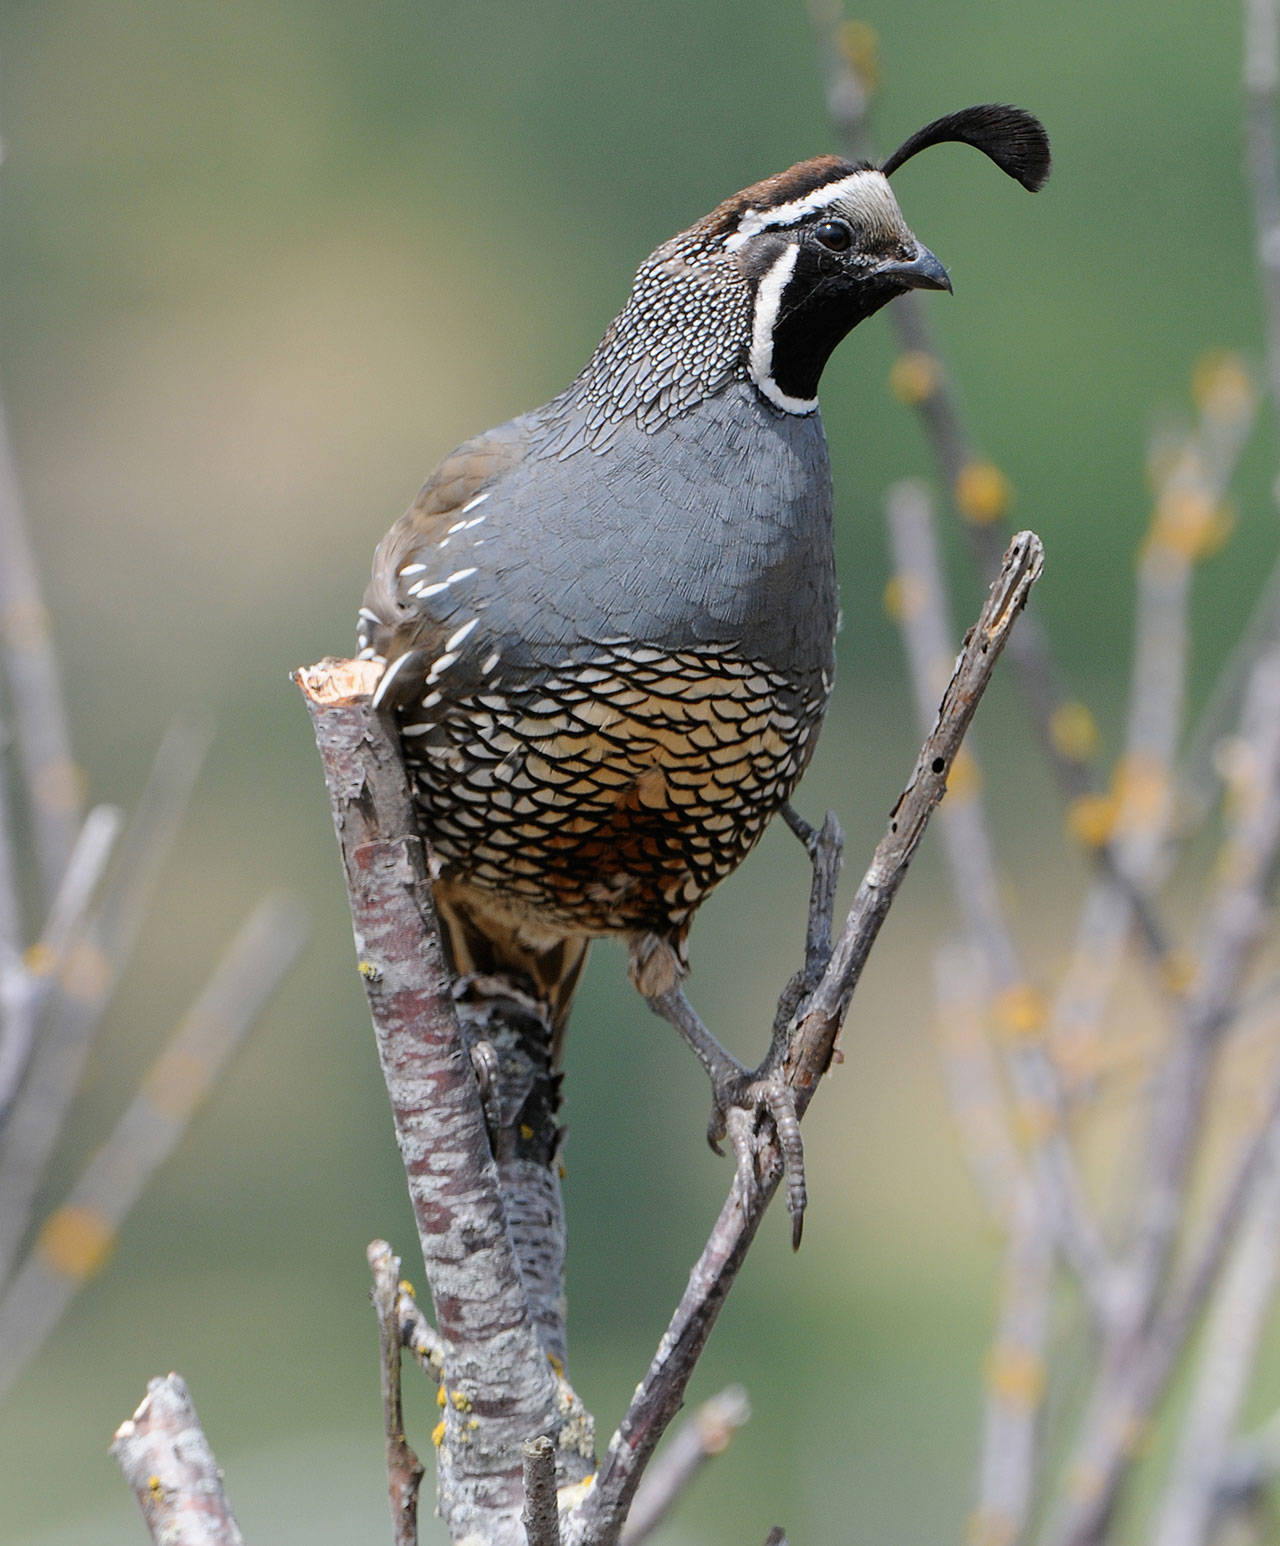 Craig Johnson photo — A male California quail watches over a large brood from his perch.